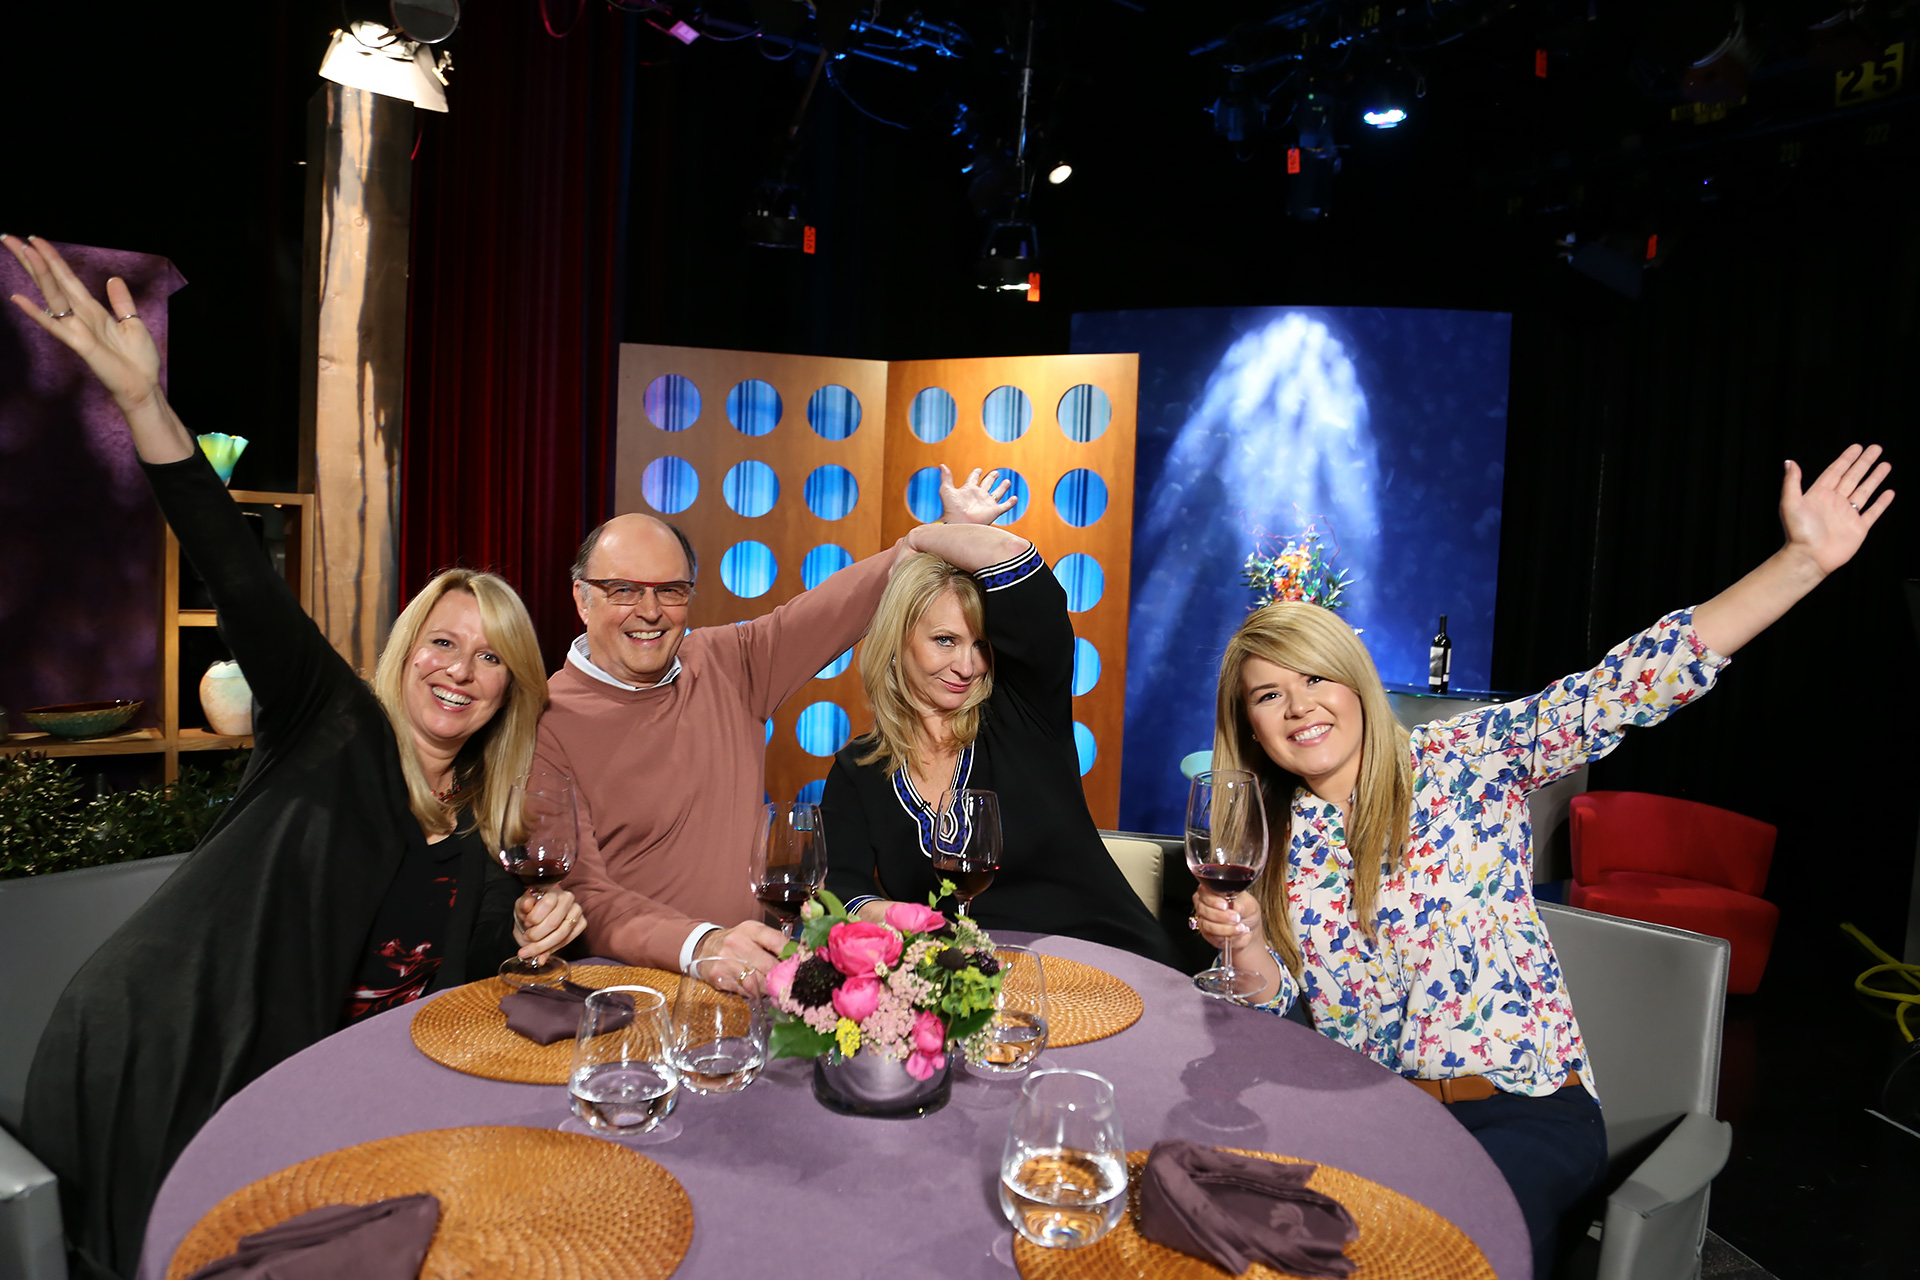 Host Leslie Sbrocco and guests having fun on the set of season 12 episode 17.